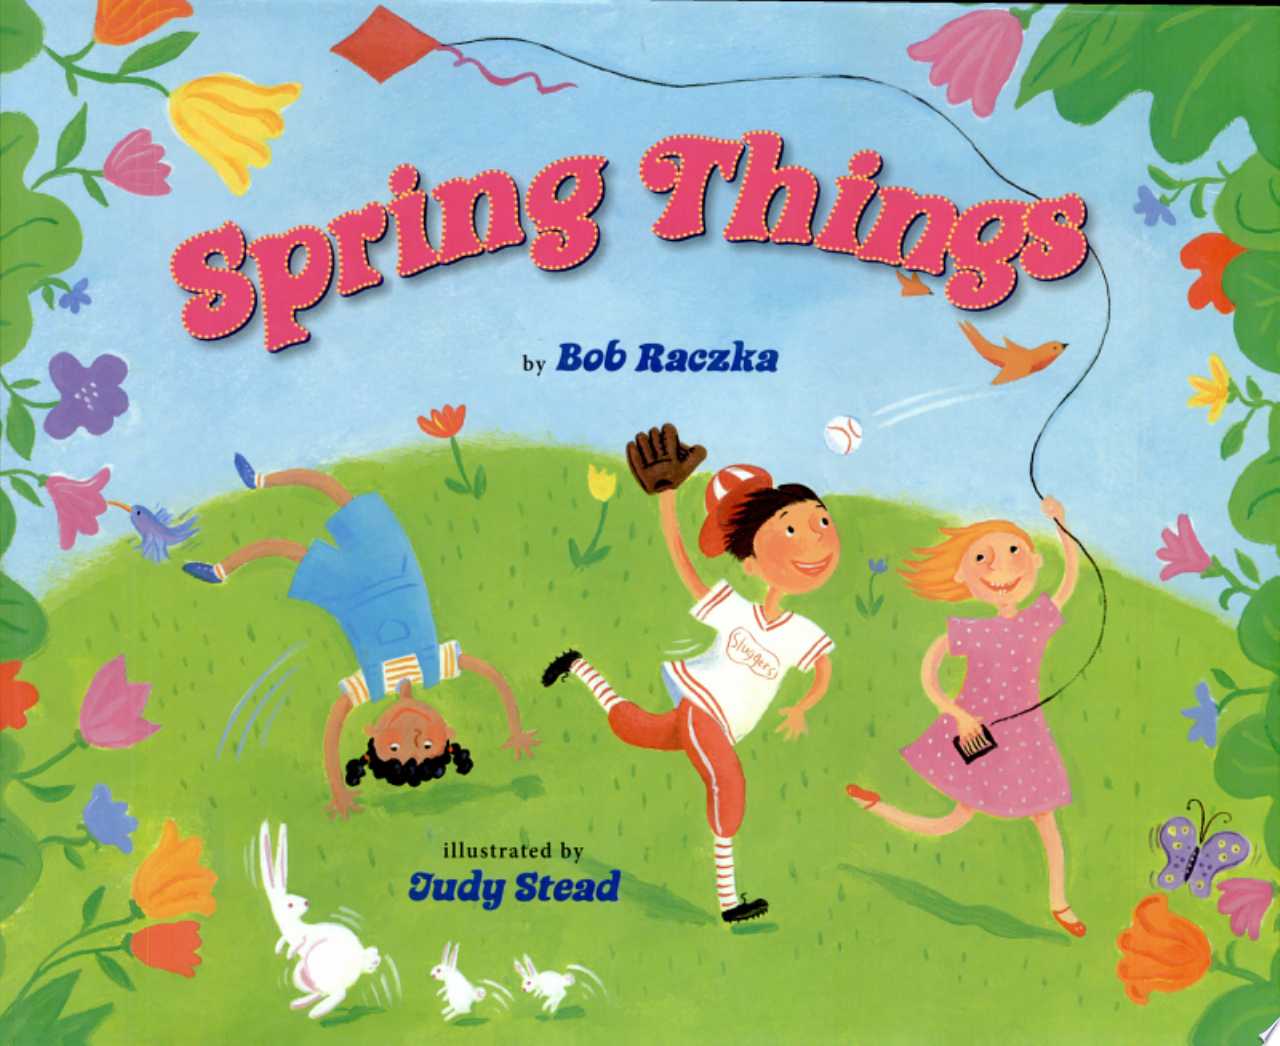 Image for "Spring Things"